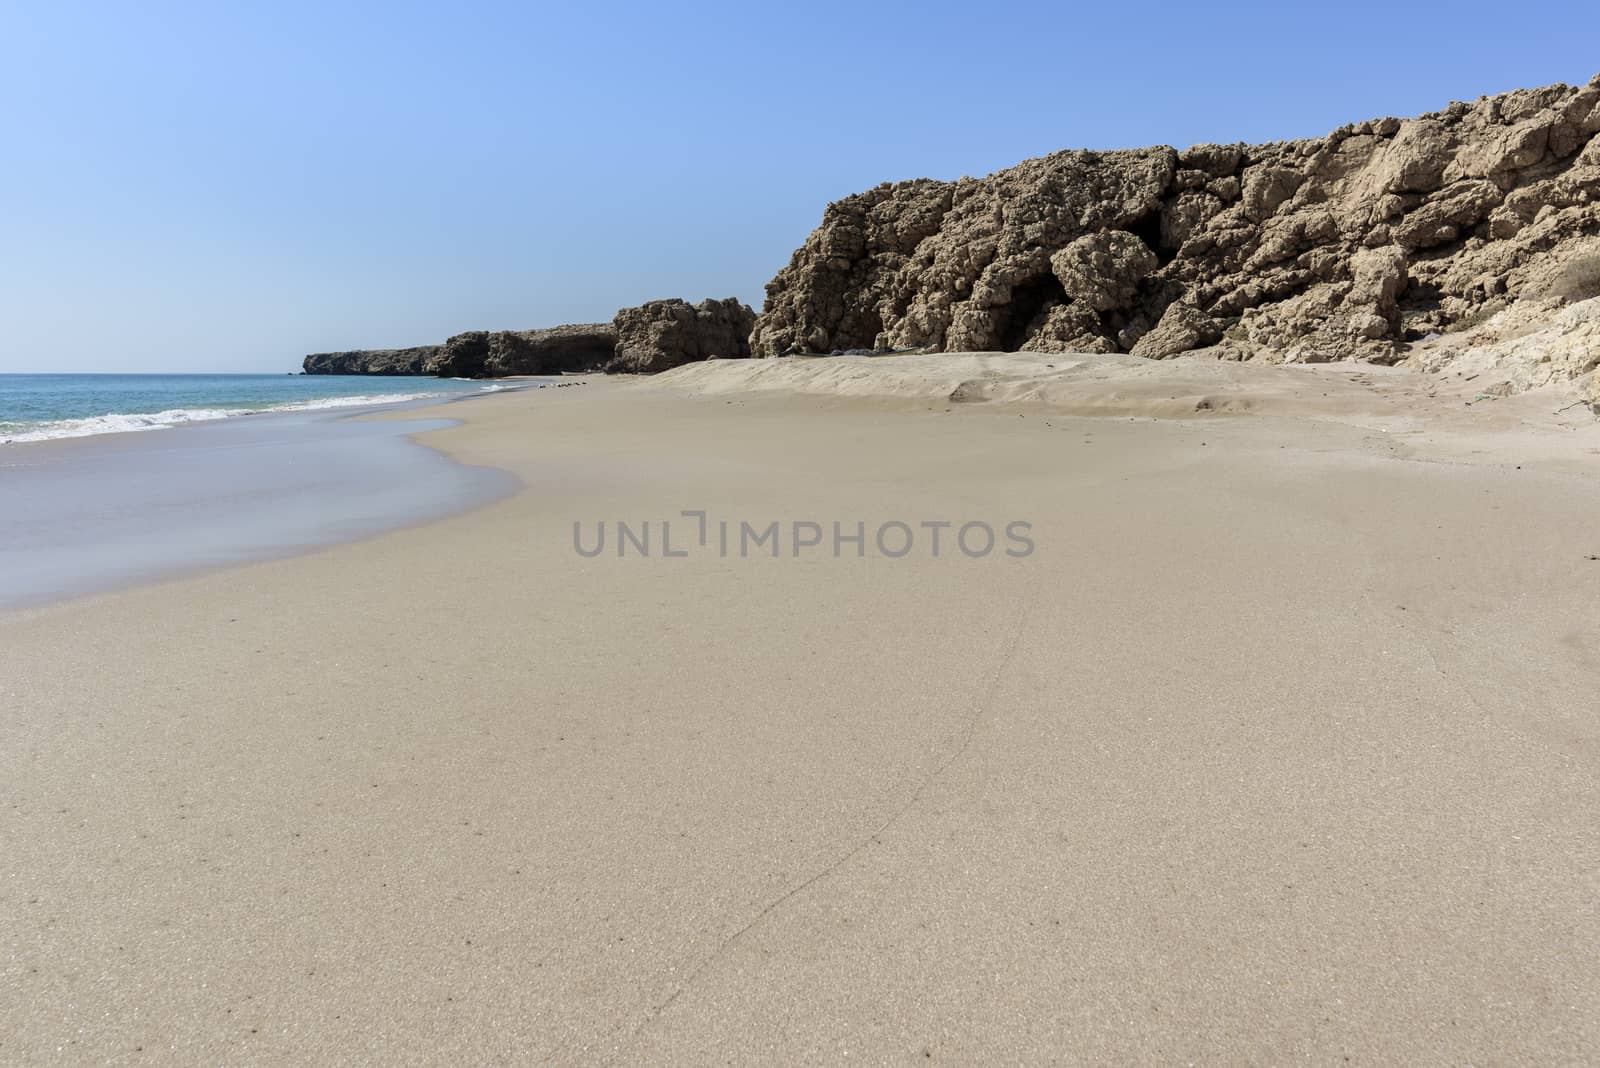 Wild beach at the coat of Ras Al Jinz, Sultanate of Oman. It is close to Ras Al Hadd and turtles are coming in the region to nest attracting many tourists